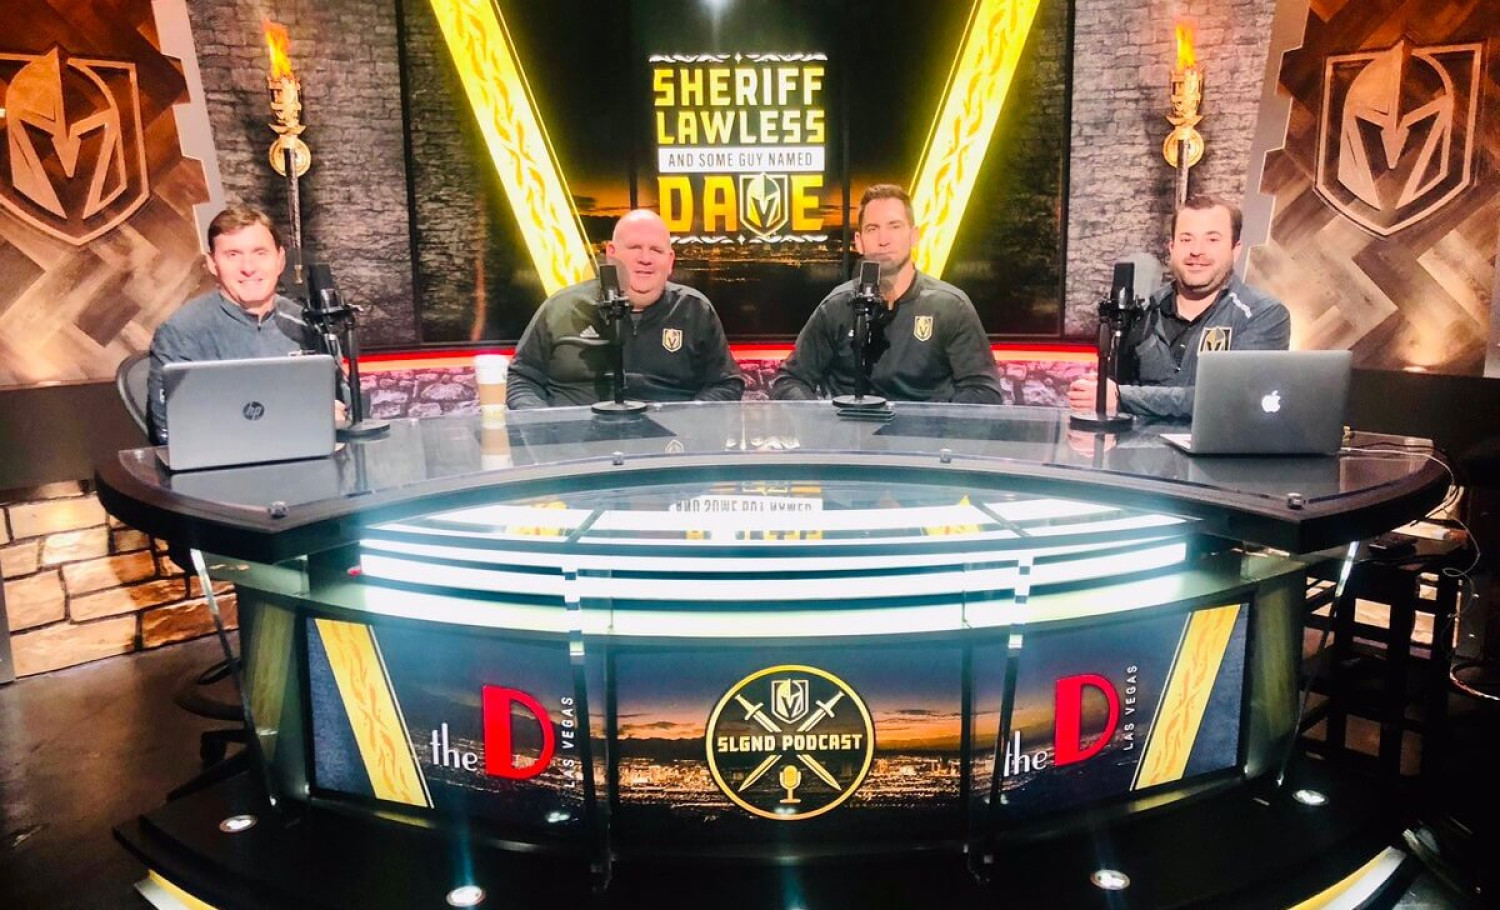 Sheriff, Lawless and Some Guy Named Dave podcast team